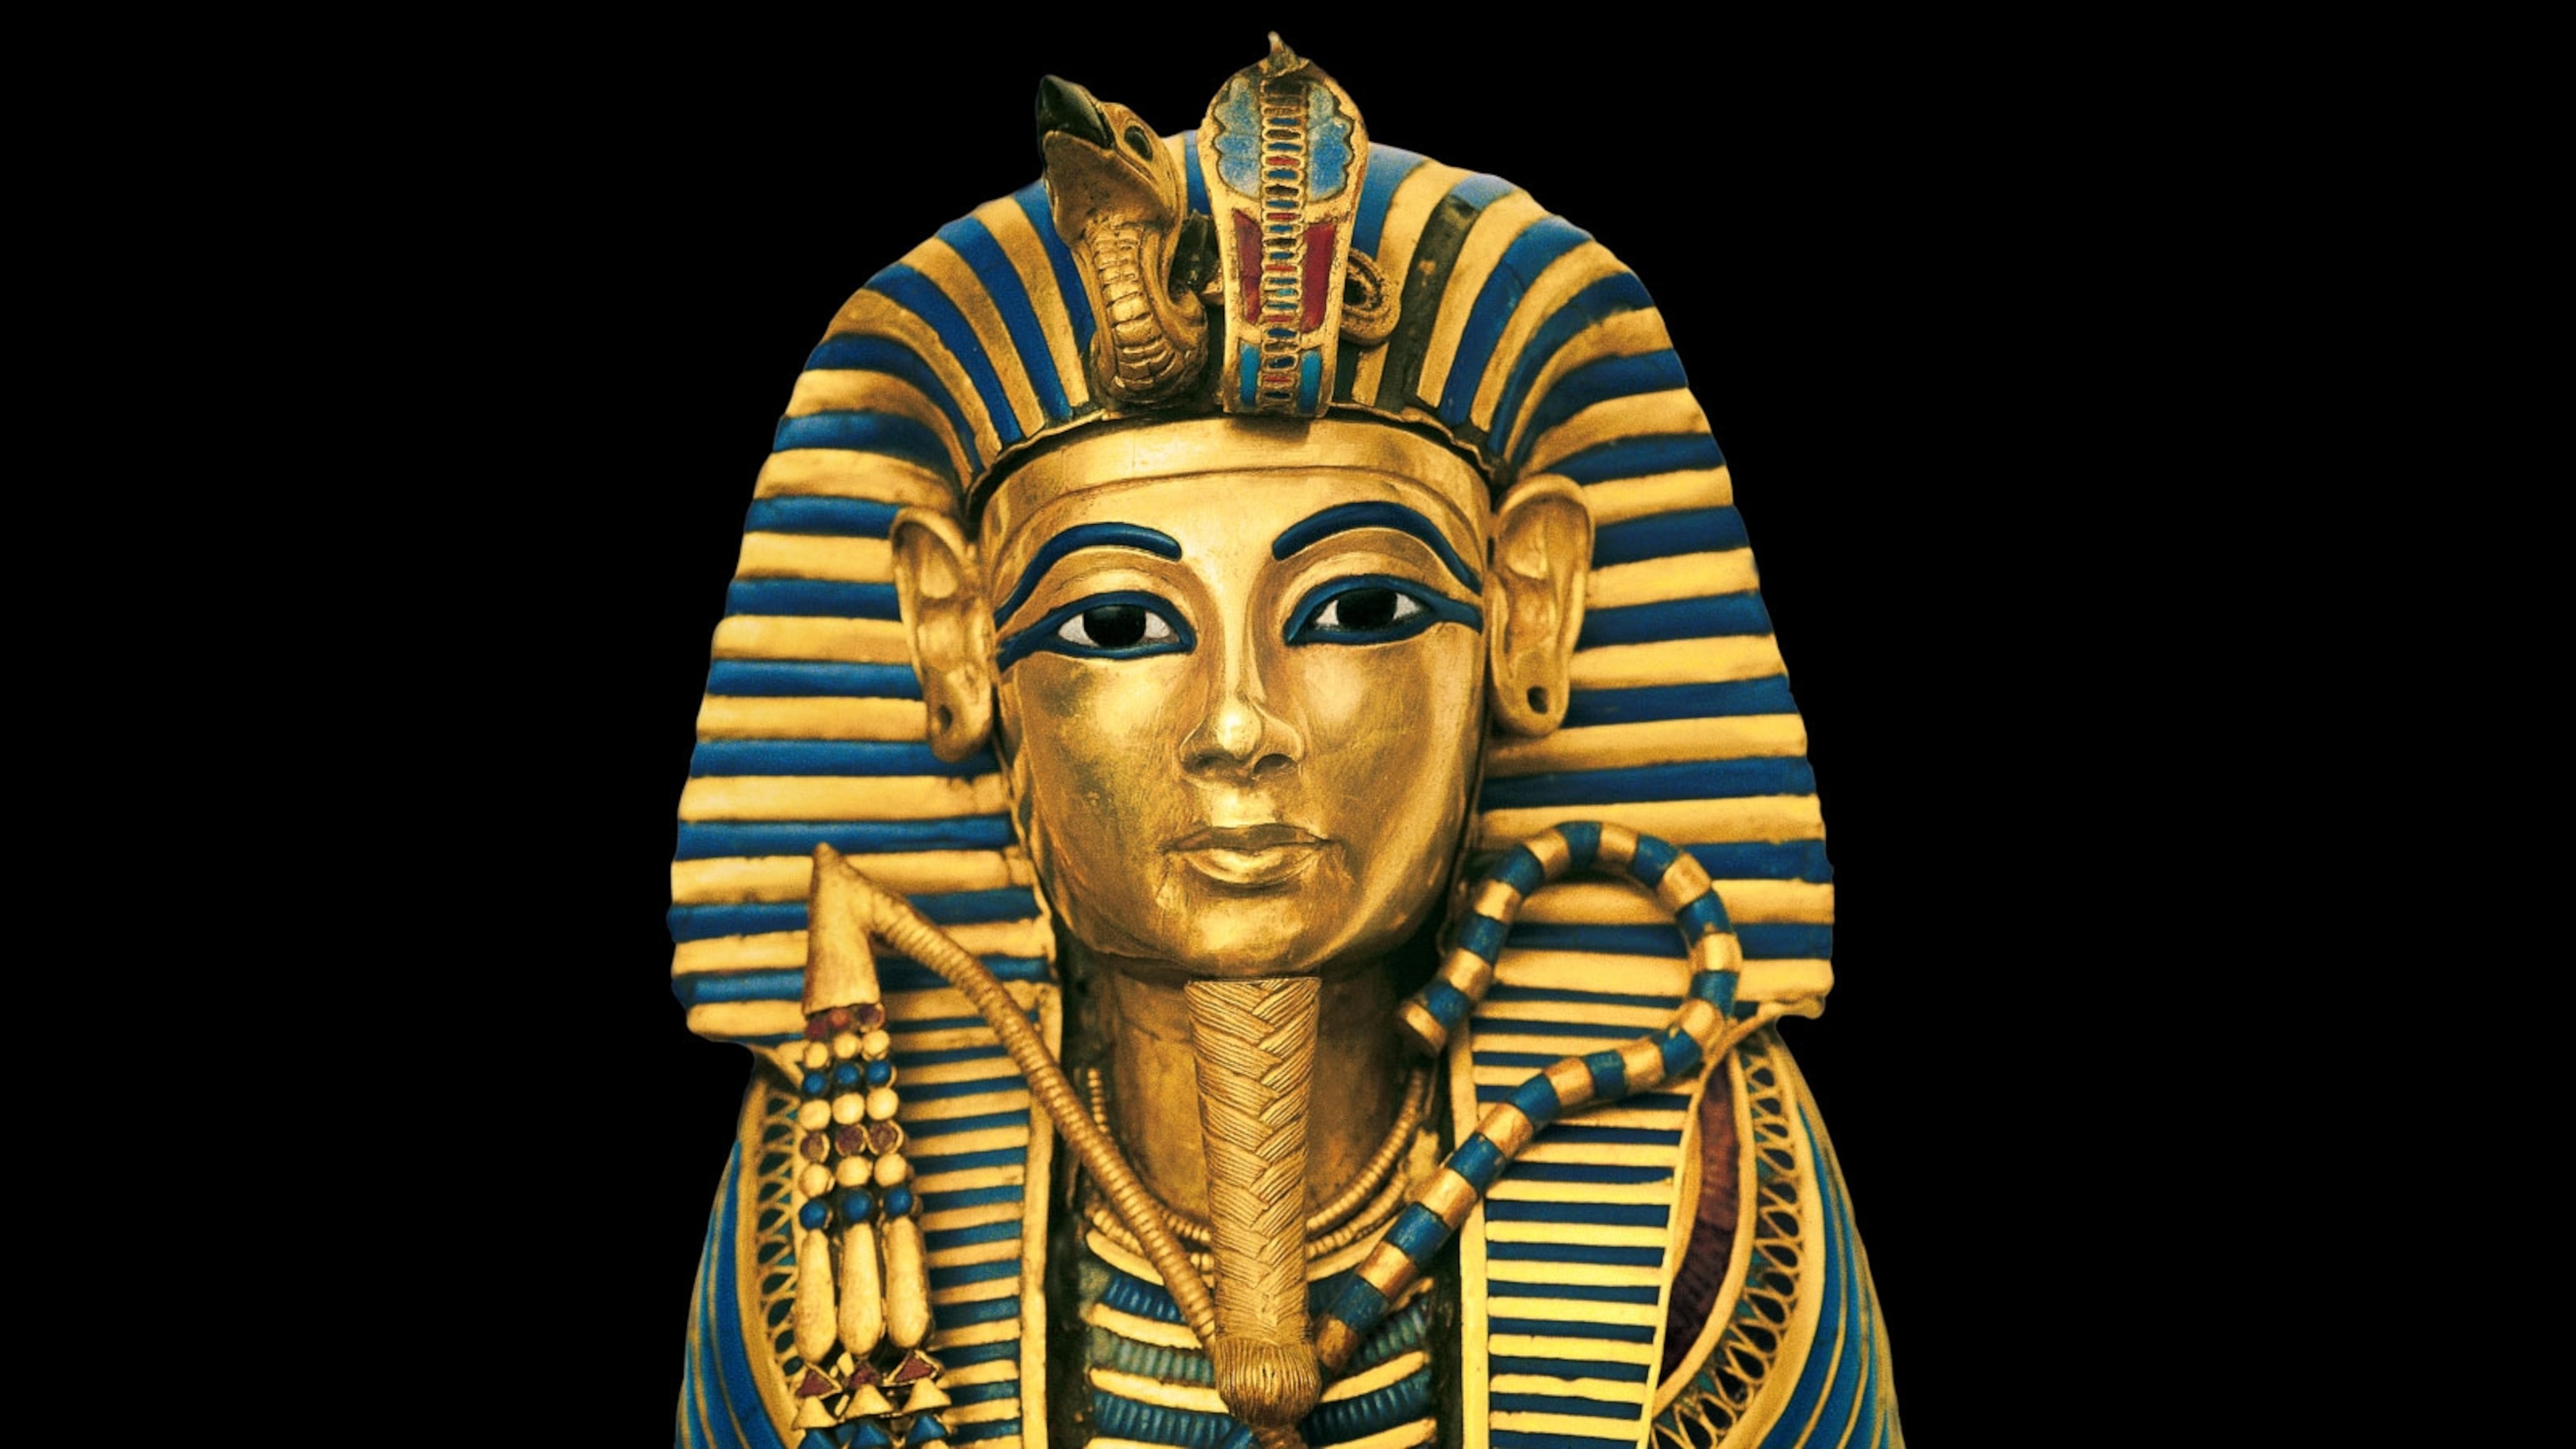 Mummy mystery the story of king tut